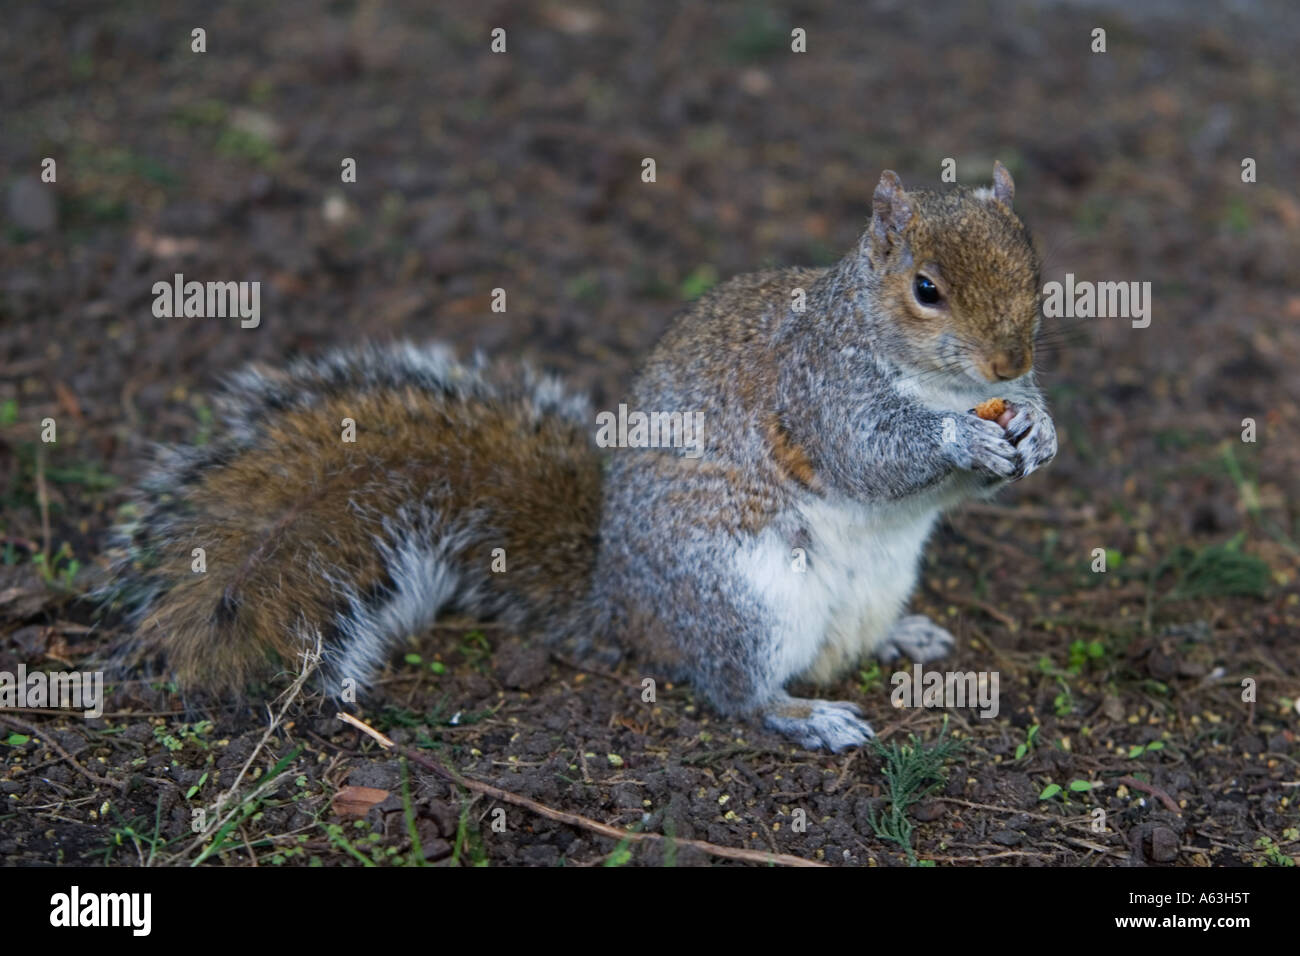 Little squirrel nibbles on a nut. Stock Photo